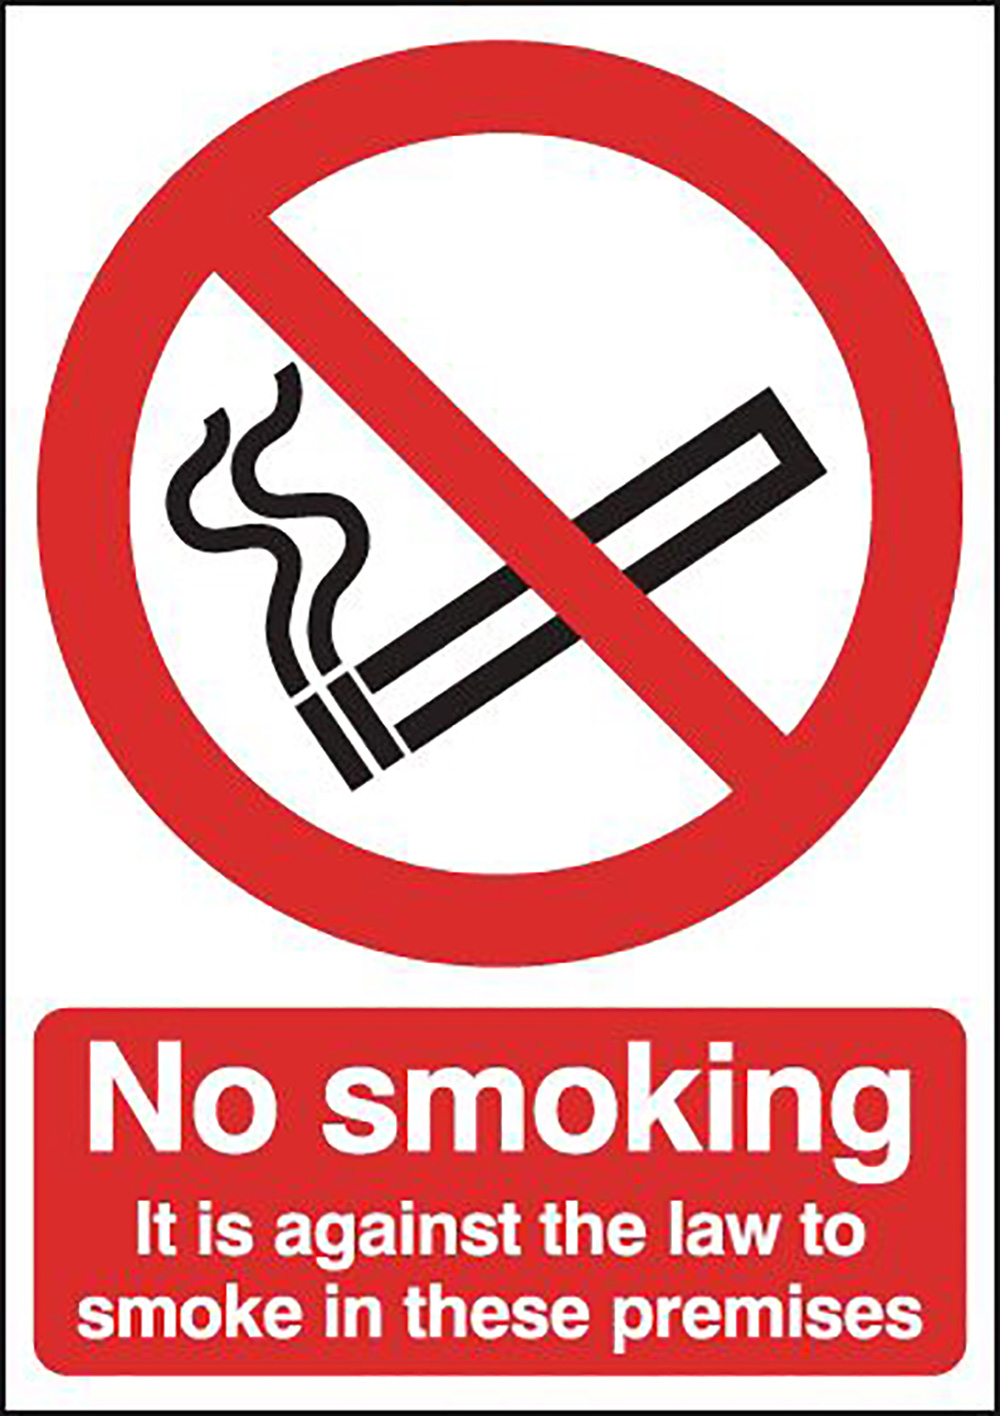 No Smoking It Is Against The Law  210x148mm Self Adhesive Vinyl Safety Sign  